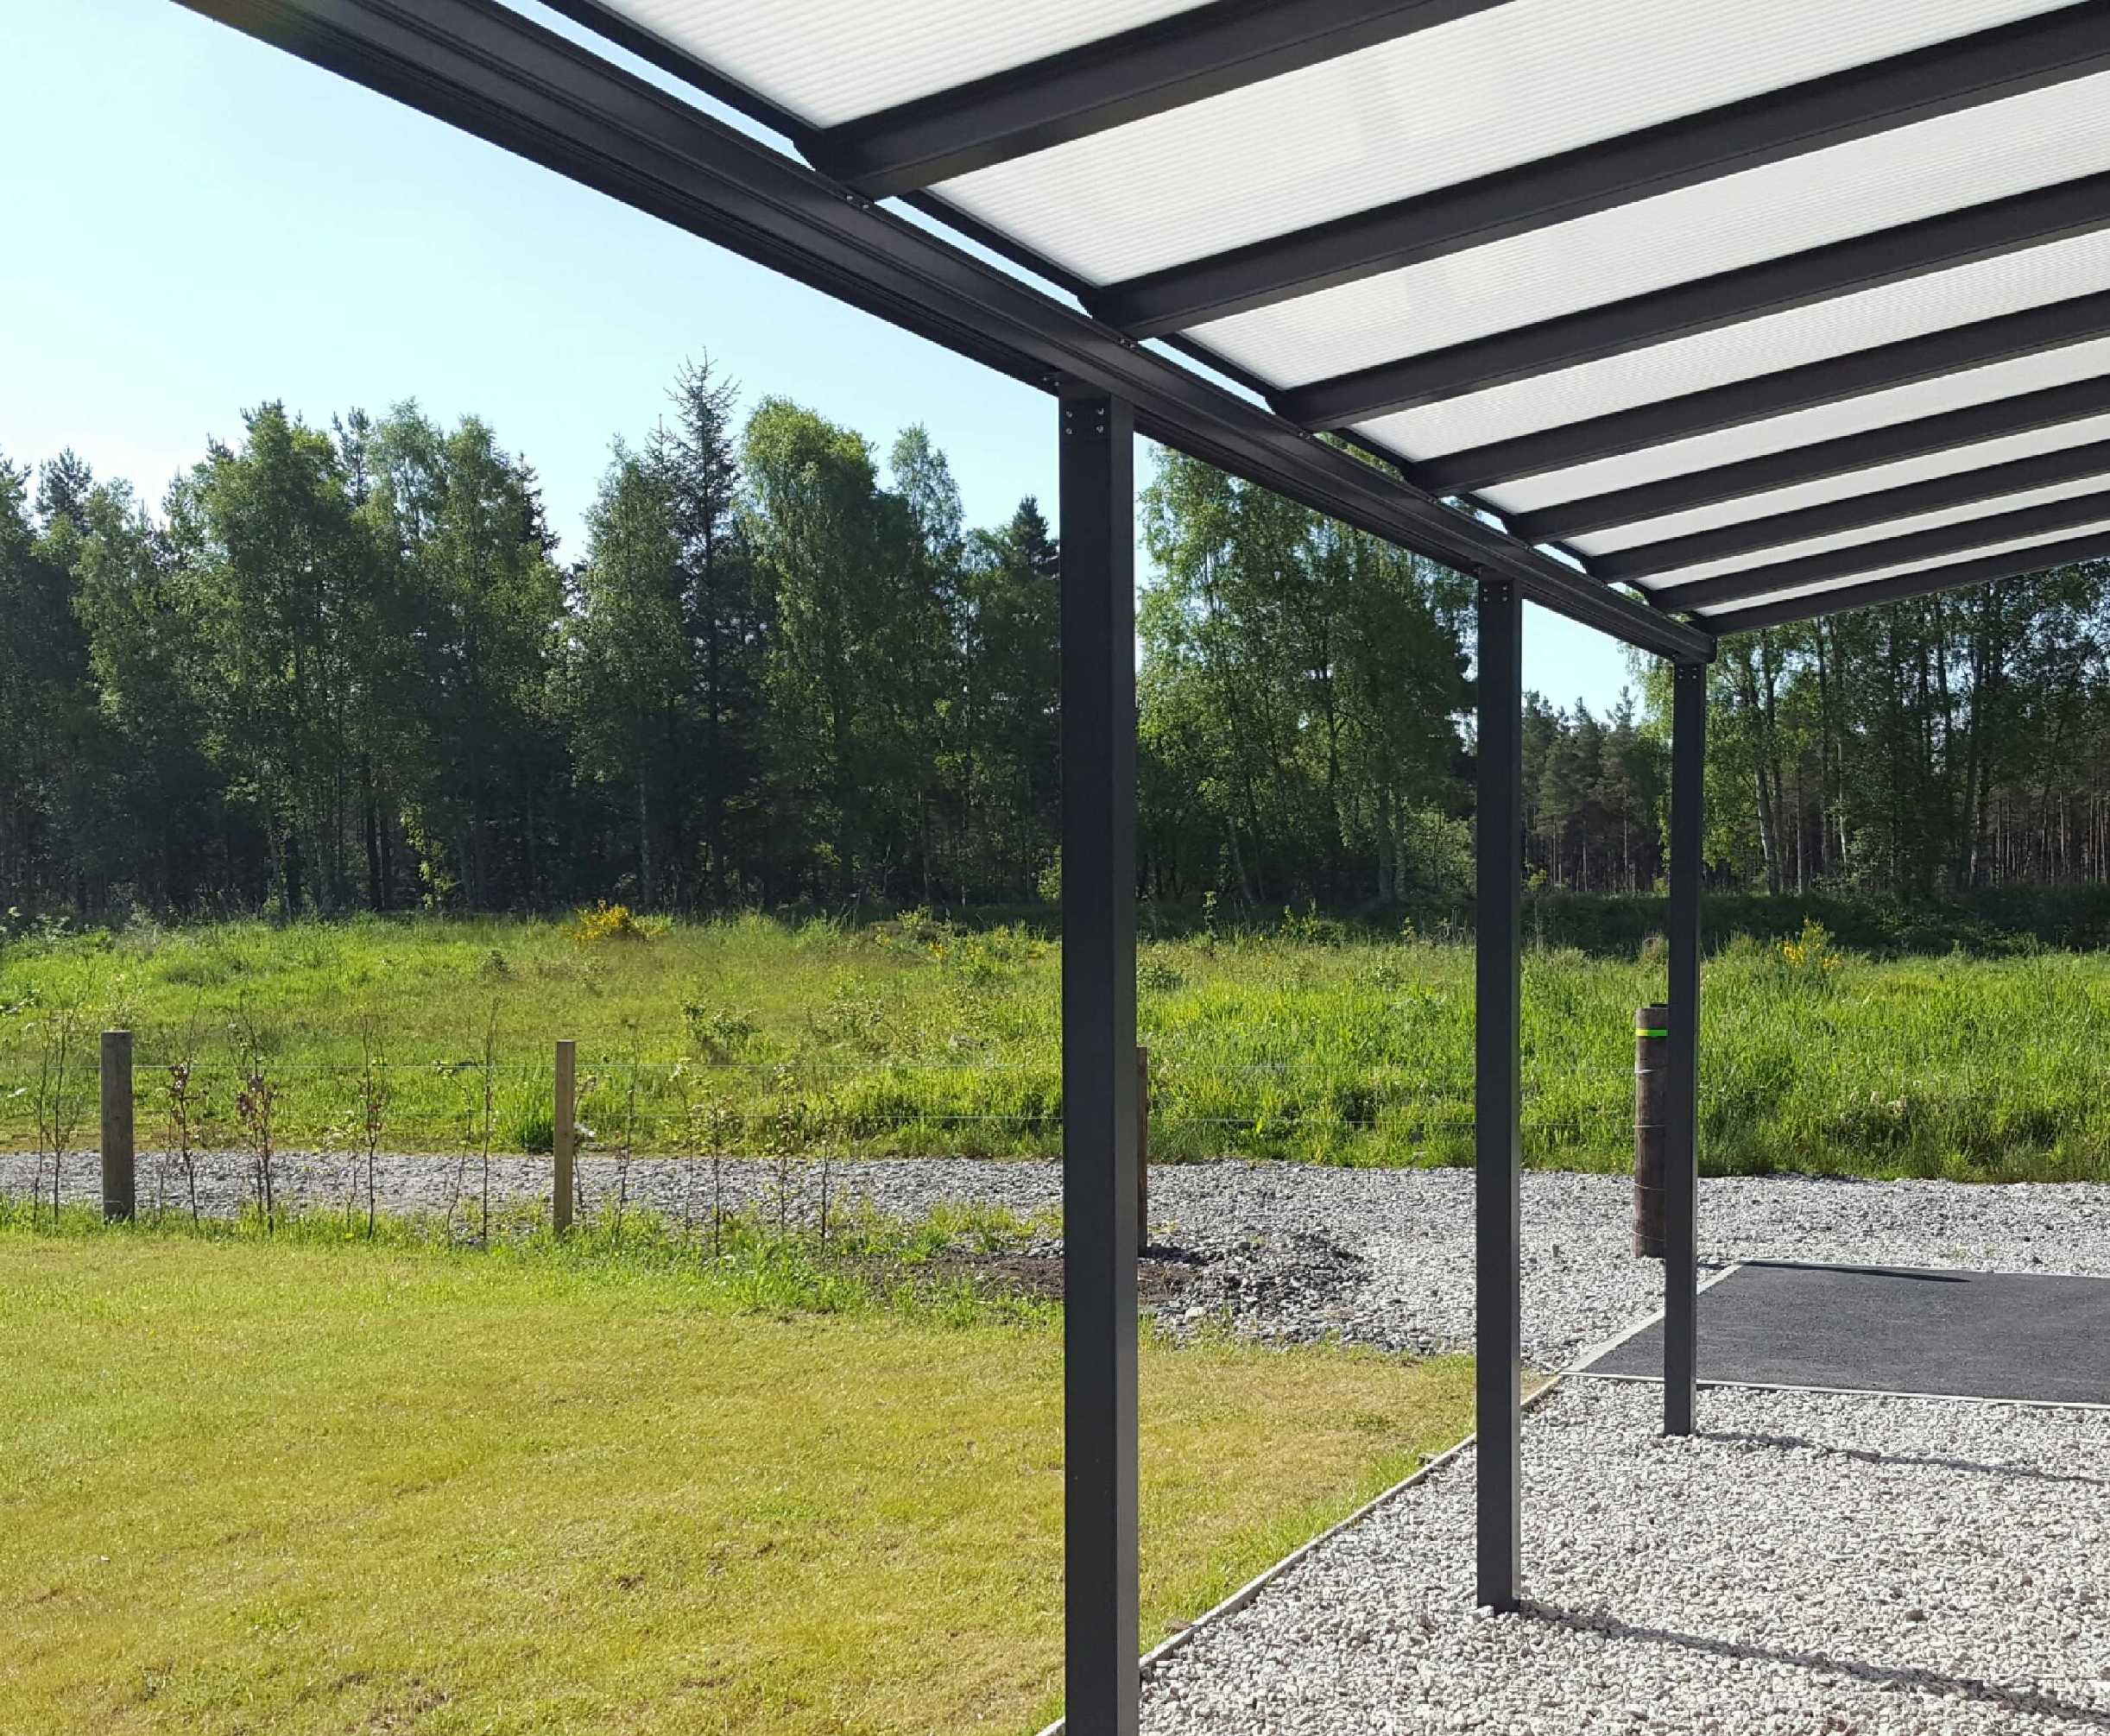 Omega Smart Lean-To Canopy, Anthracite Grey, 6mm Glass Clear Plate Polycarbonate Glazing - 7.7m (W) x 3.0m (P), (4) Supporting Posts